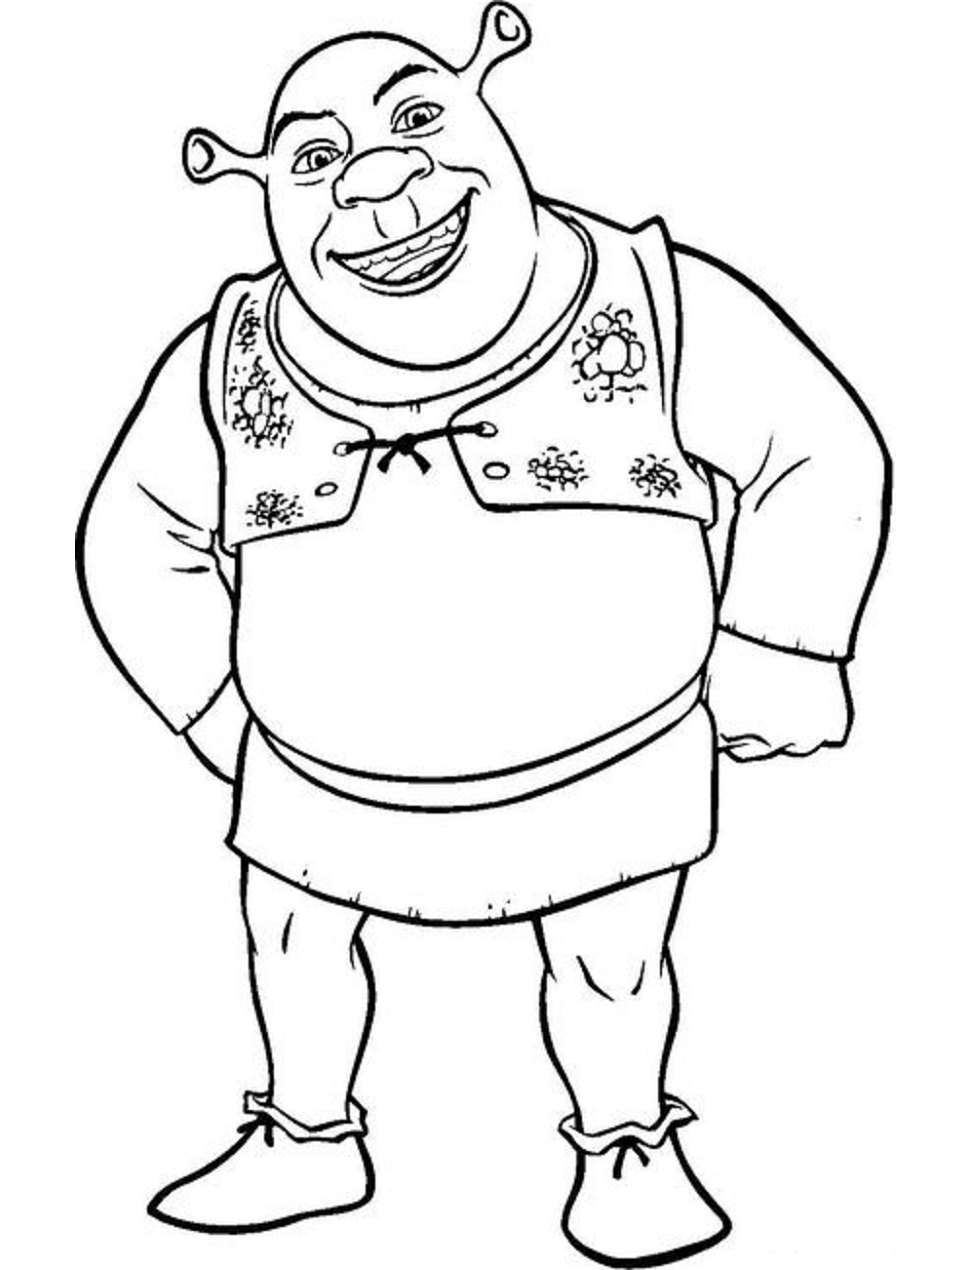 Download Shrek Is Smiling Coloring Page - Free Printable Coloring Pages for Kids